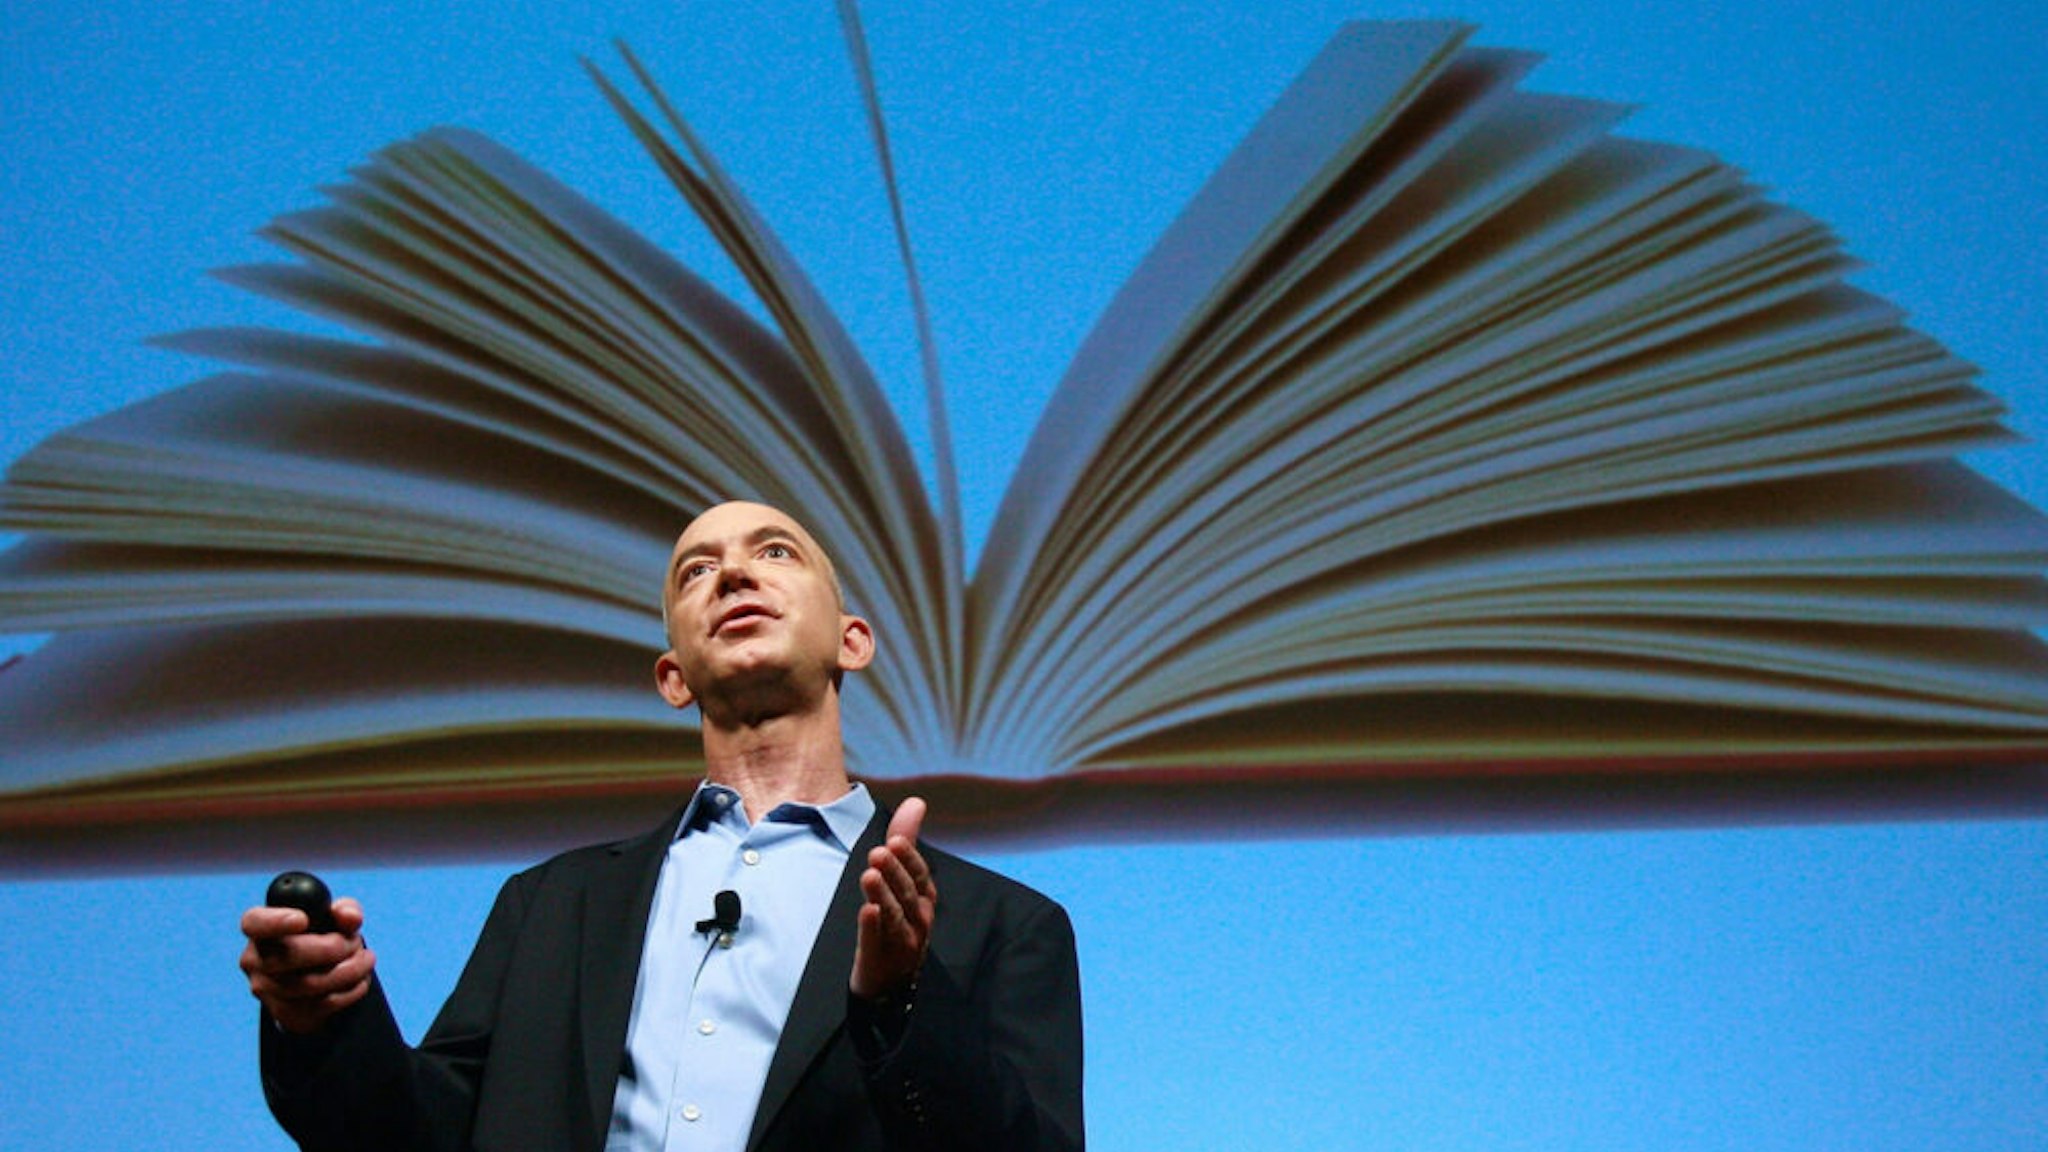 NEW YORK - FEBRUARY 09: Amazon.com founder and CEO Jeffrey P. Bezos speaks at an event unveiling the new Amazon Kindle 2.0 at the Morgan Library &amp; Museum February 9, 2009 in New York City. The updated electronic reading device is slimmer with new syncing technology and longer battery life and will begin shipping February 24th.